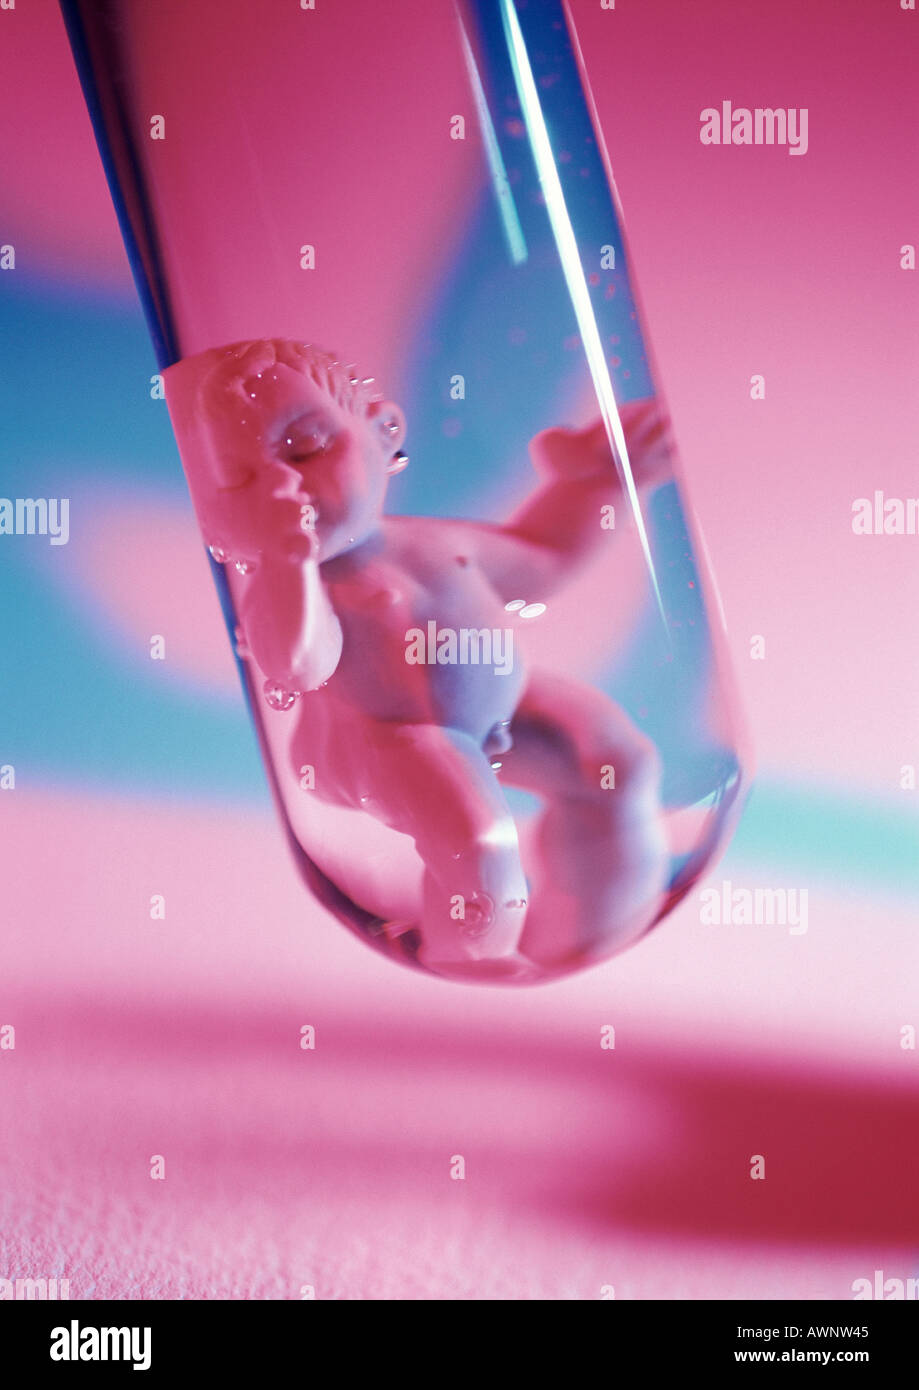 Plastic baby doll in test tube, close-up Stock Photo